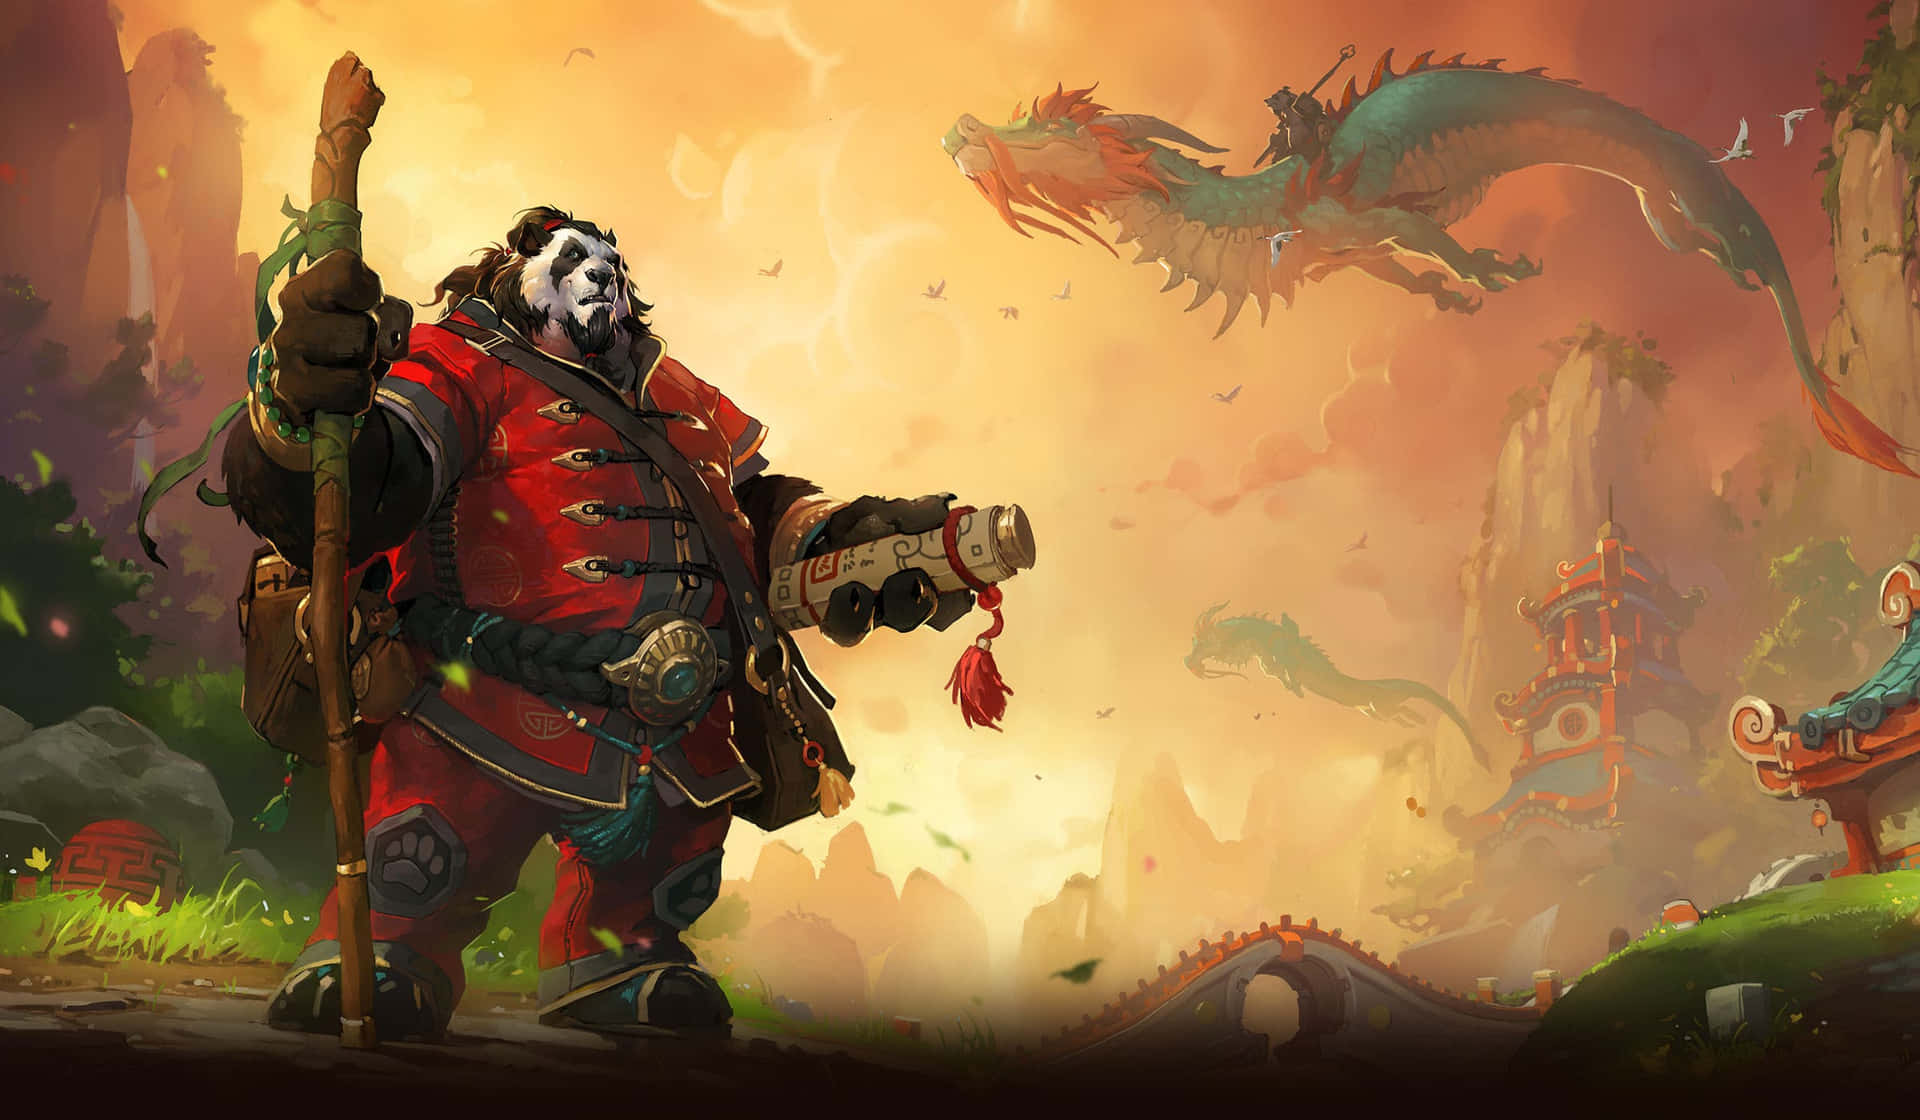 Epic Encounter In Mists Of Pandaria, World Of Warcraft Wallpaper